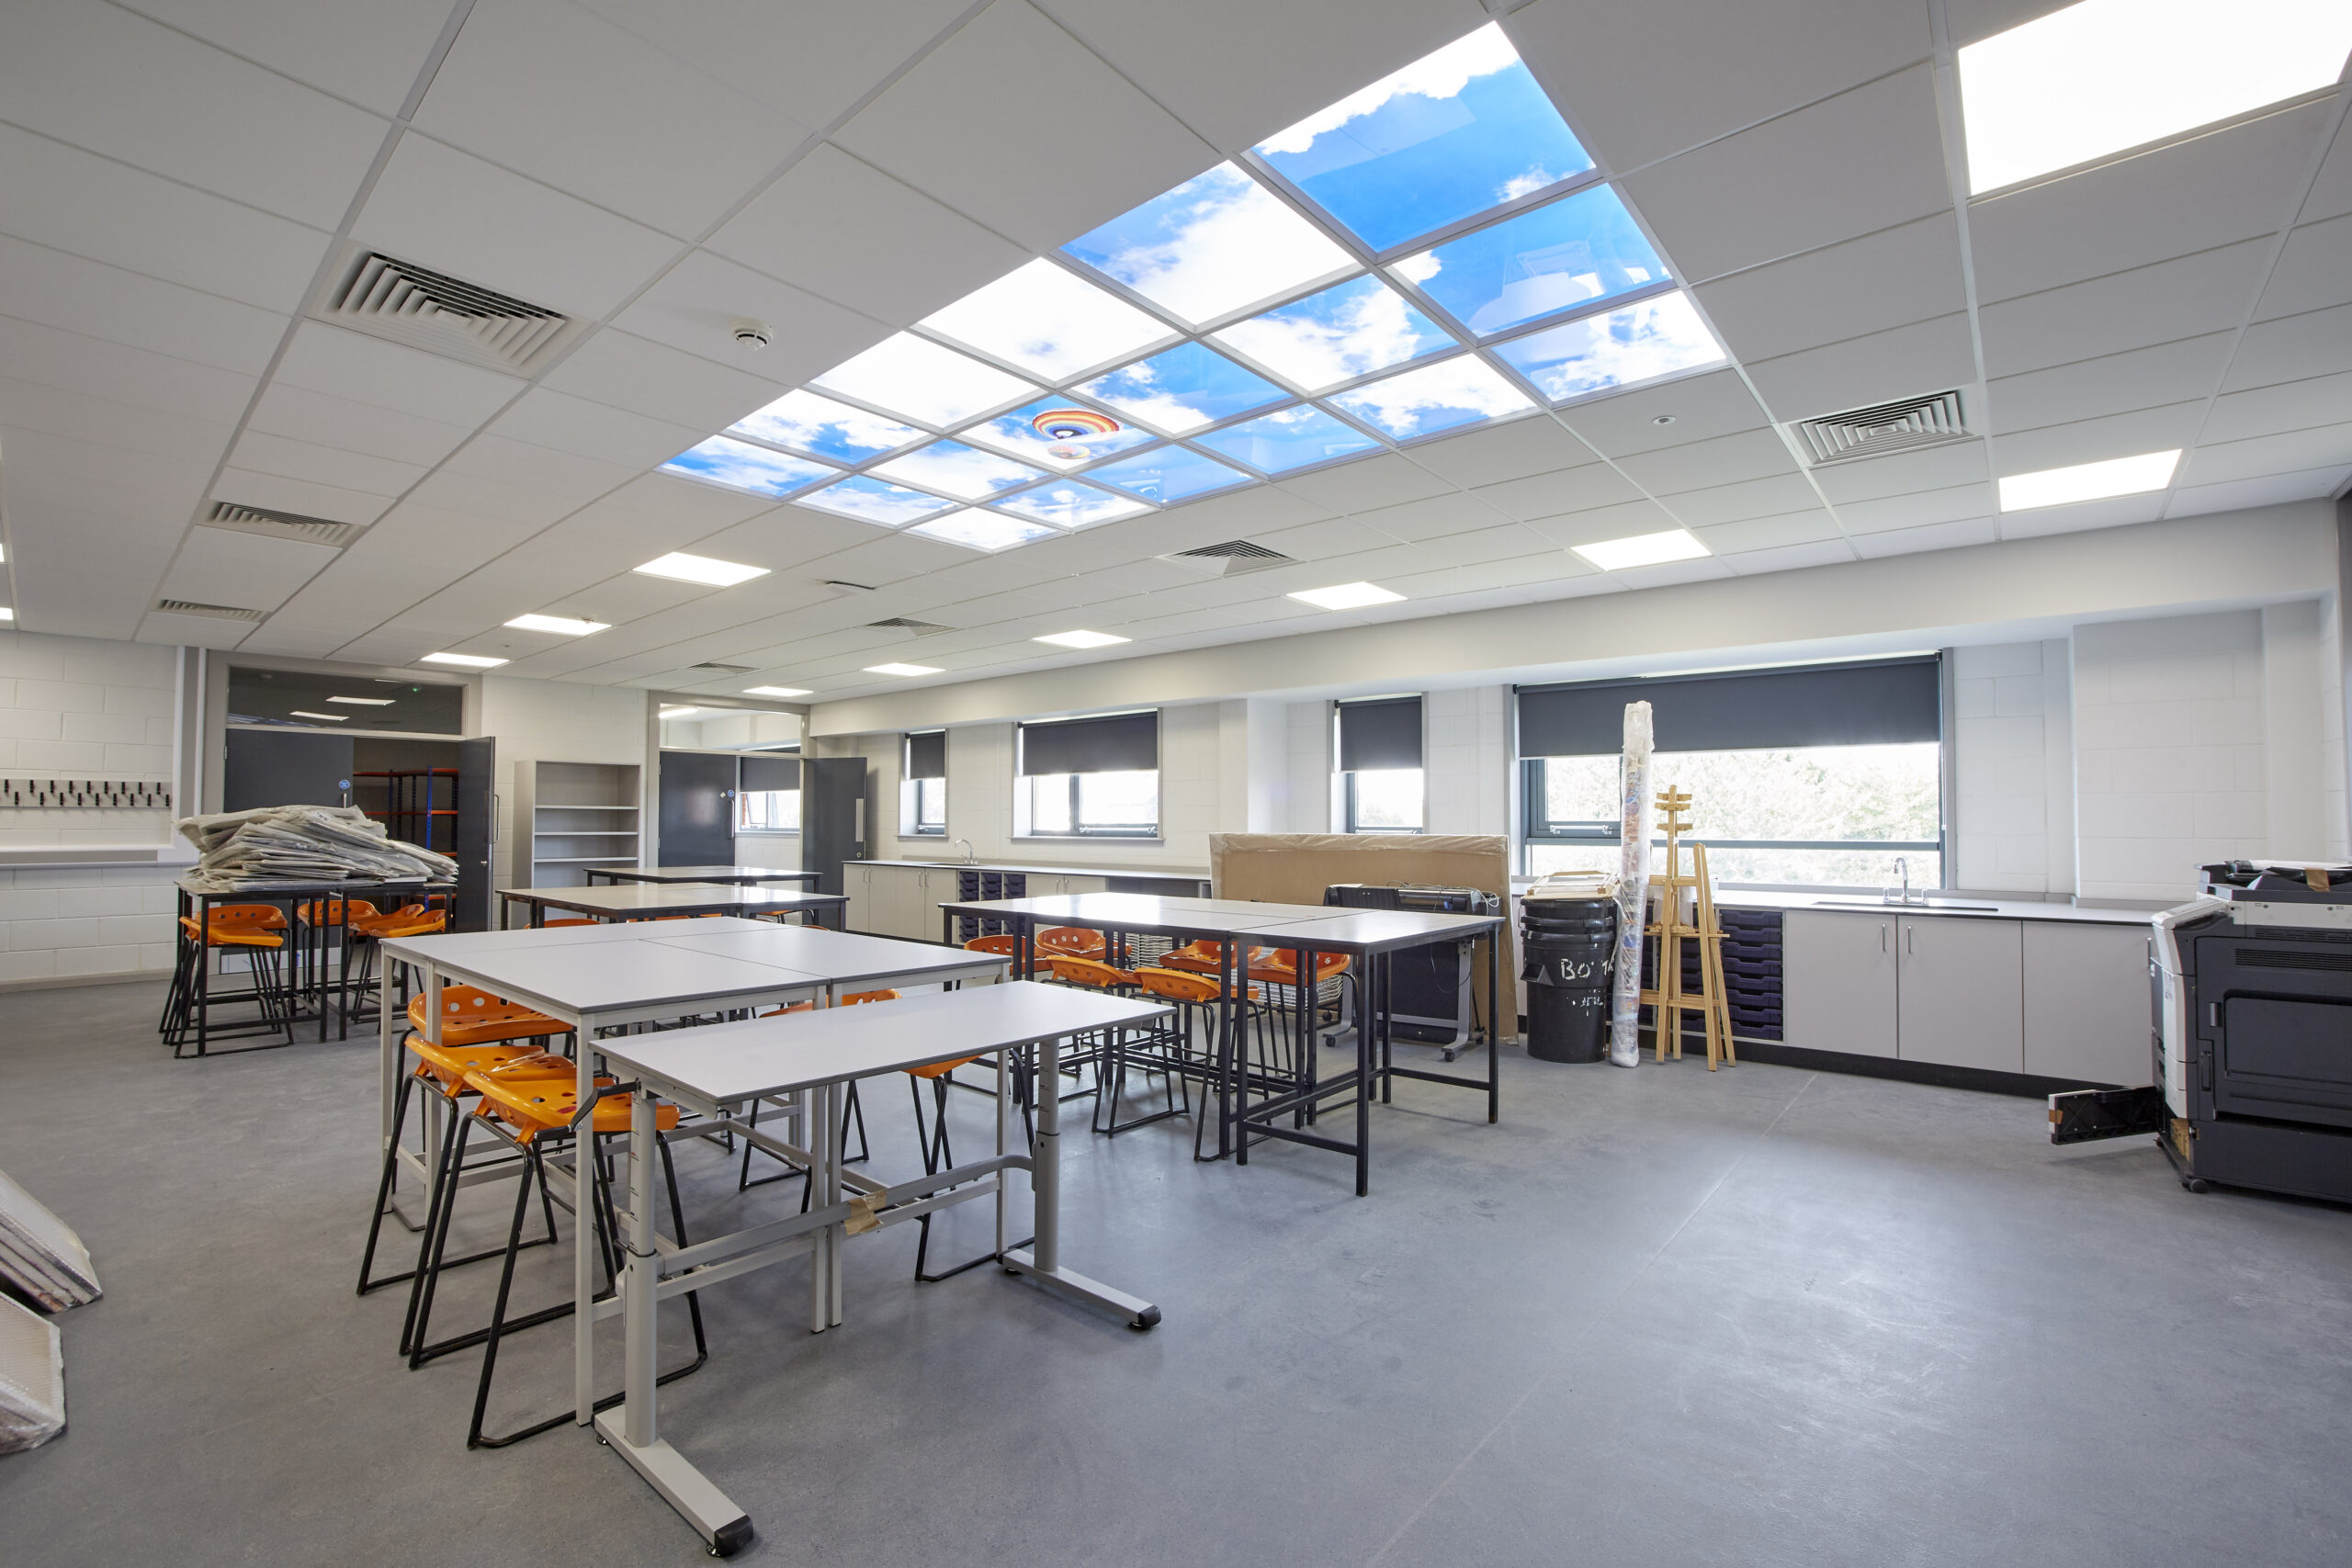 An interior shot of a refurbished art room at Hull Trinity House Academy, with a ceiling light showing blue sky, and art tables set up ready for a class to arrive.